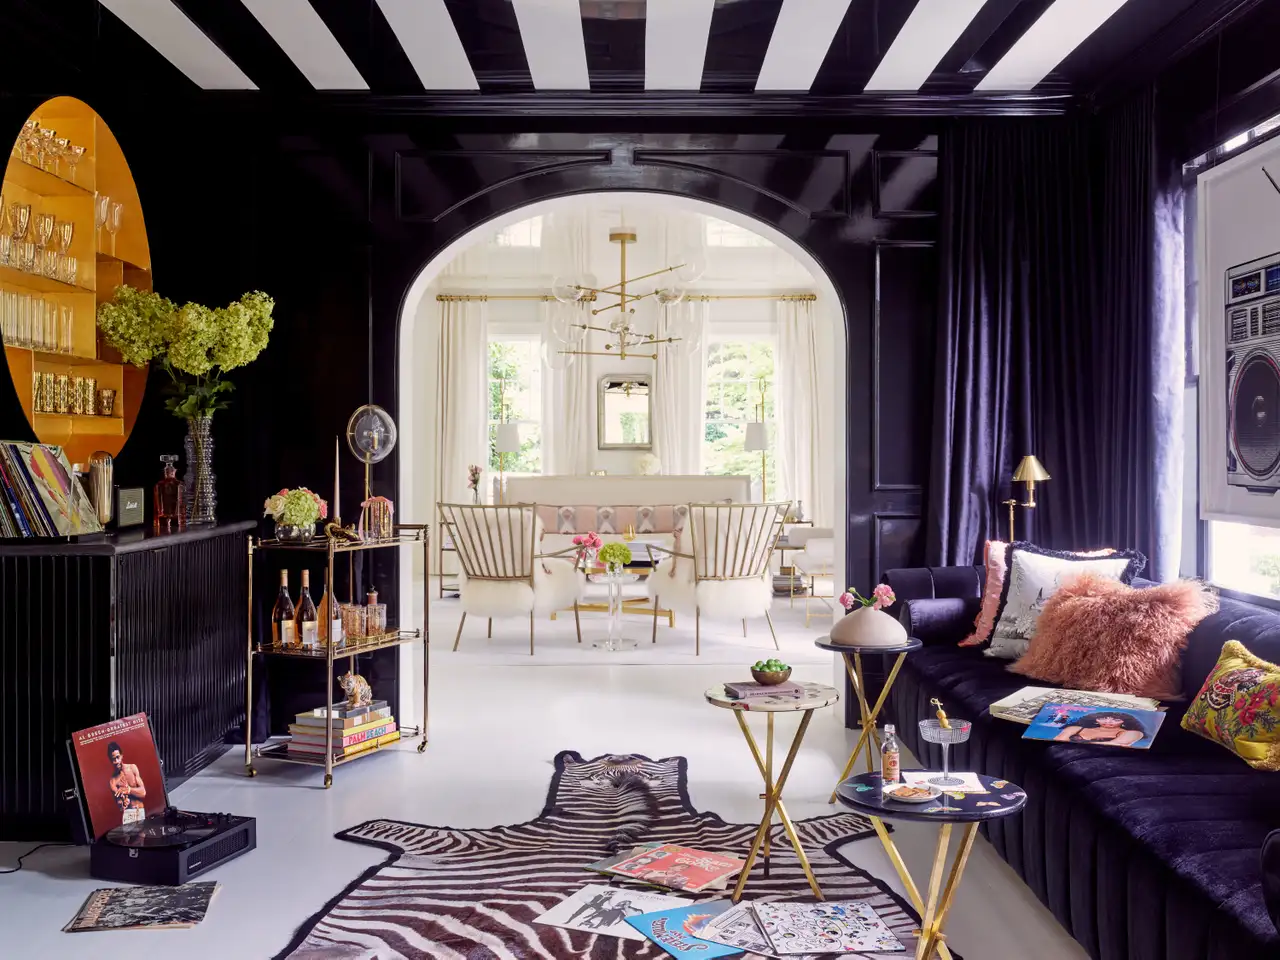 Living room in the maximalist style